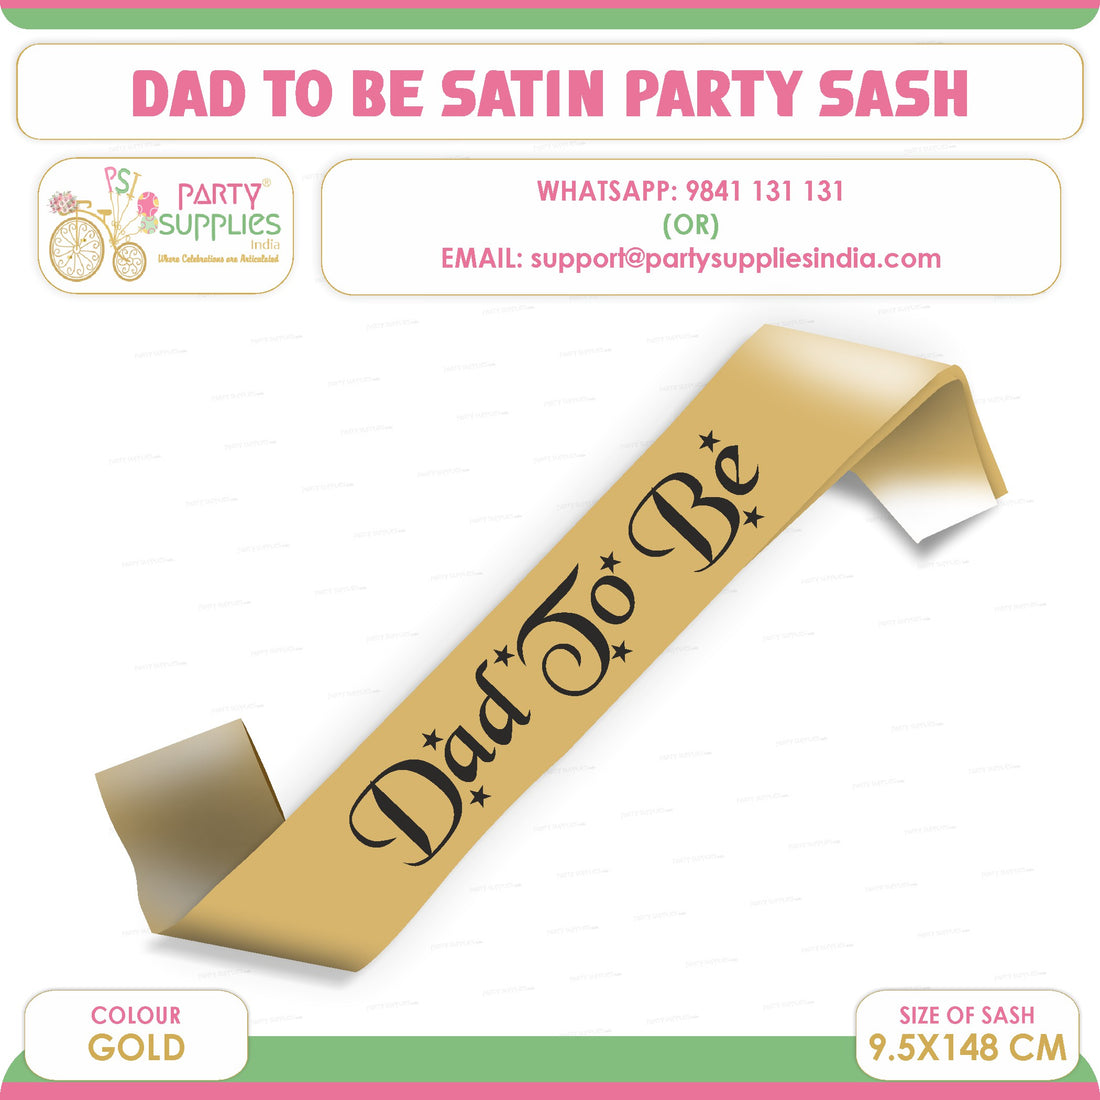 PSI Dad to Be Gold Satin Party Sash